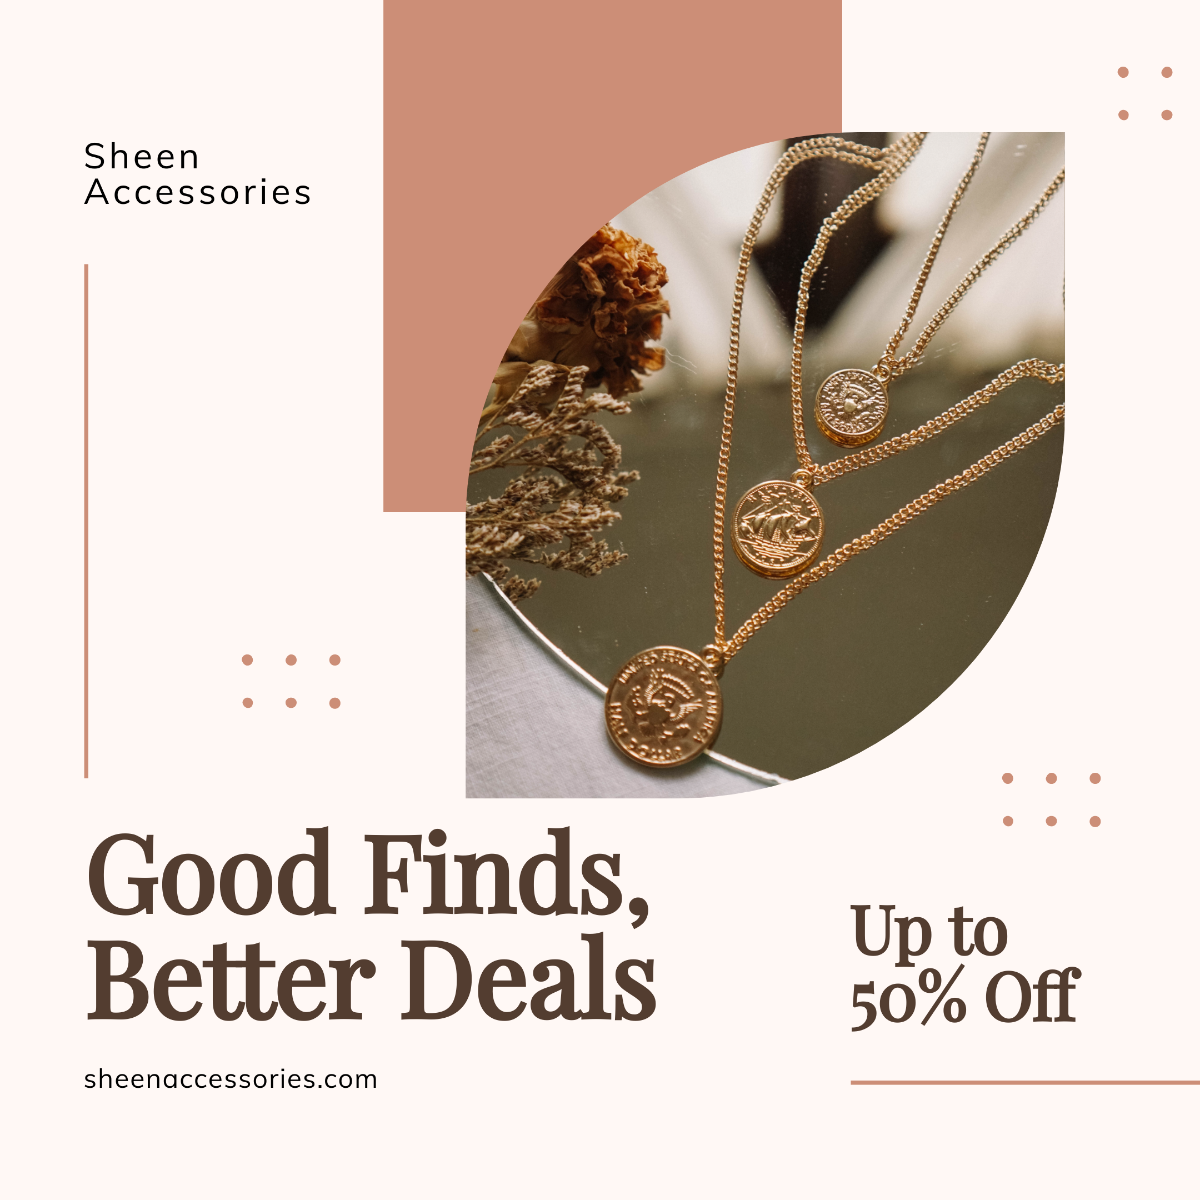 Free Accessories Instagram Feed Ad Template